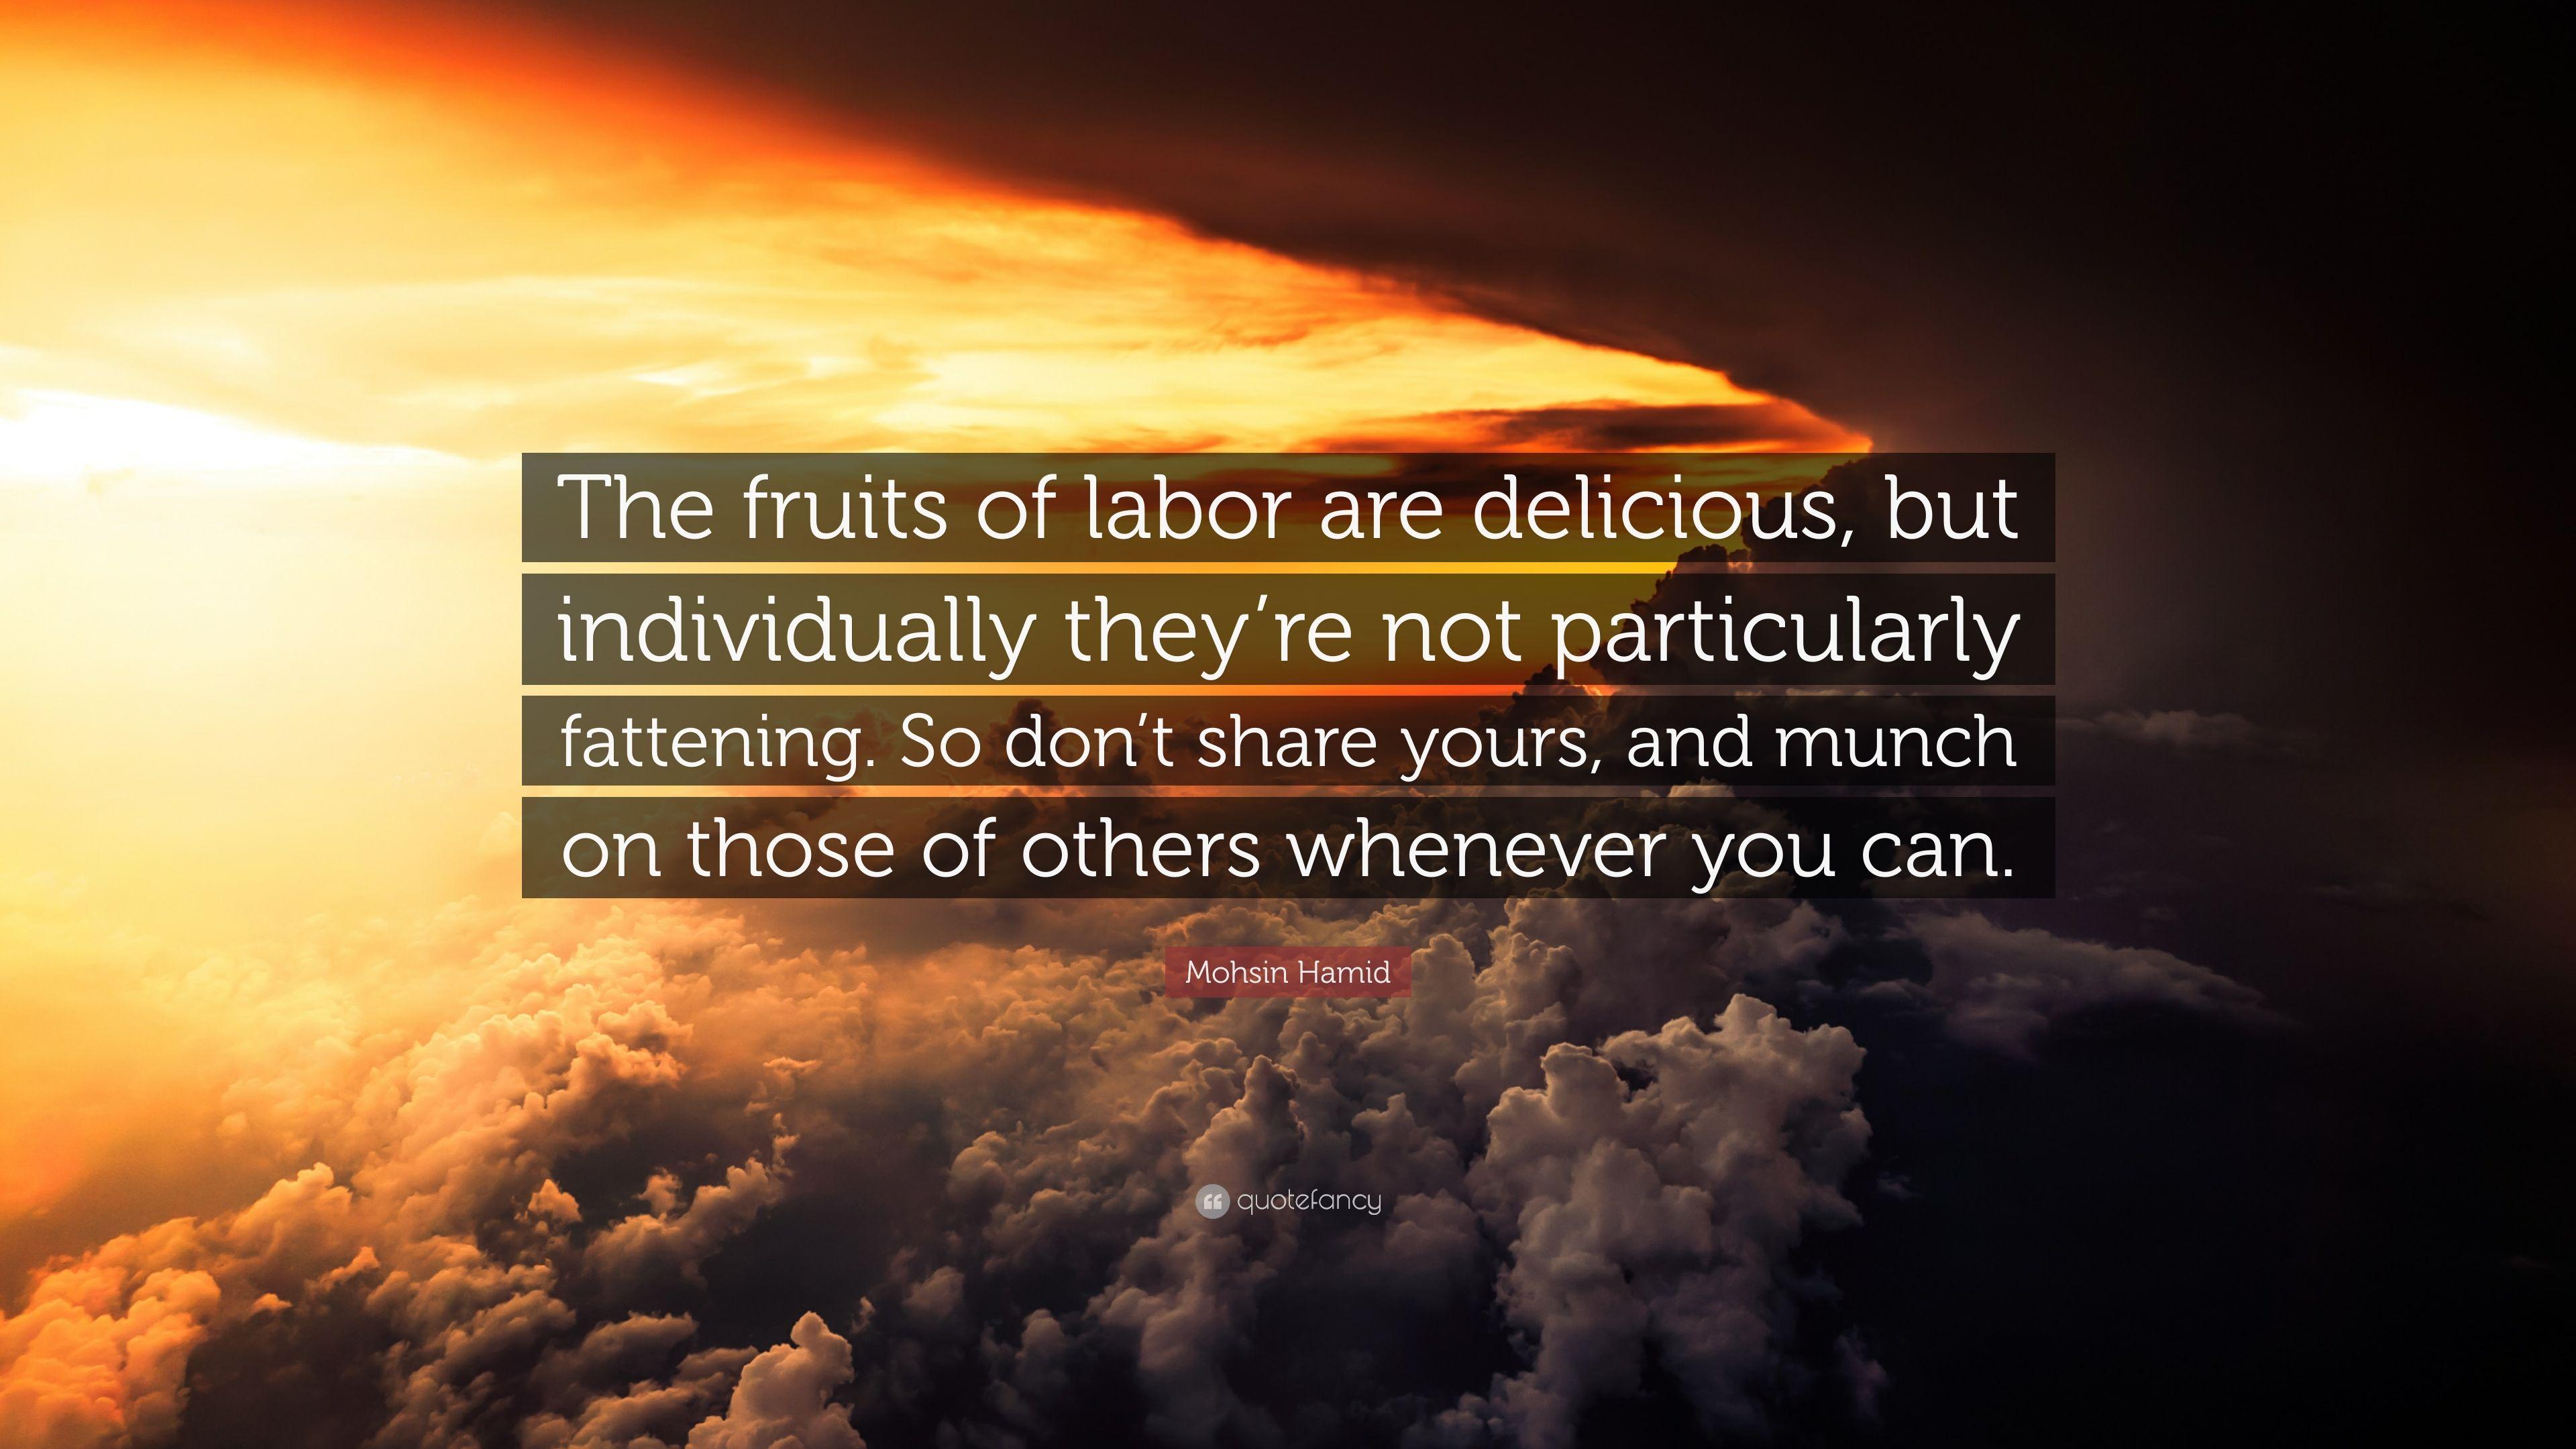 Mohsin Hamid Quote: “The fruits of labor are delicious, but